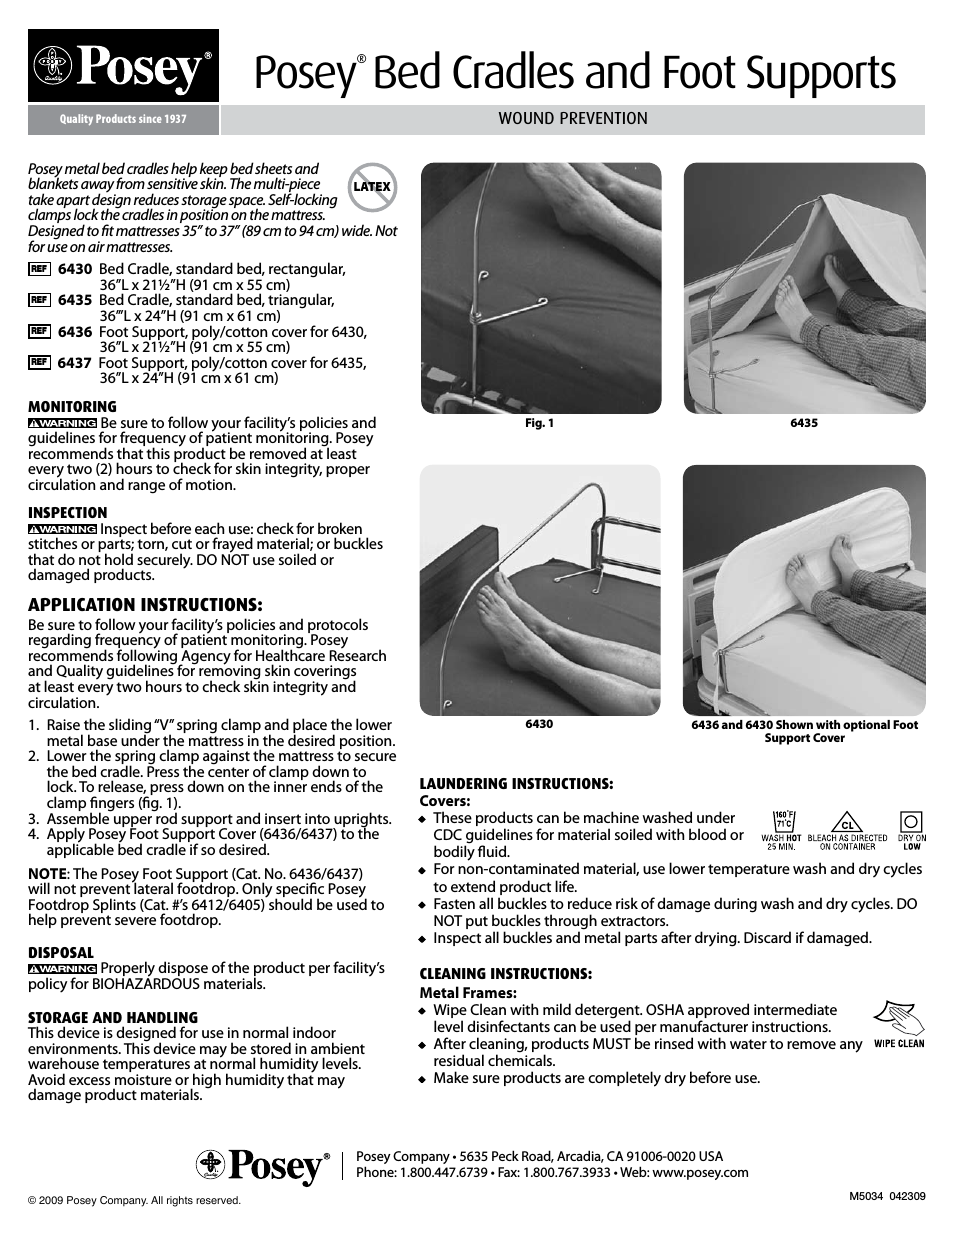 Bed Cradle and Foot Support